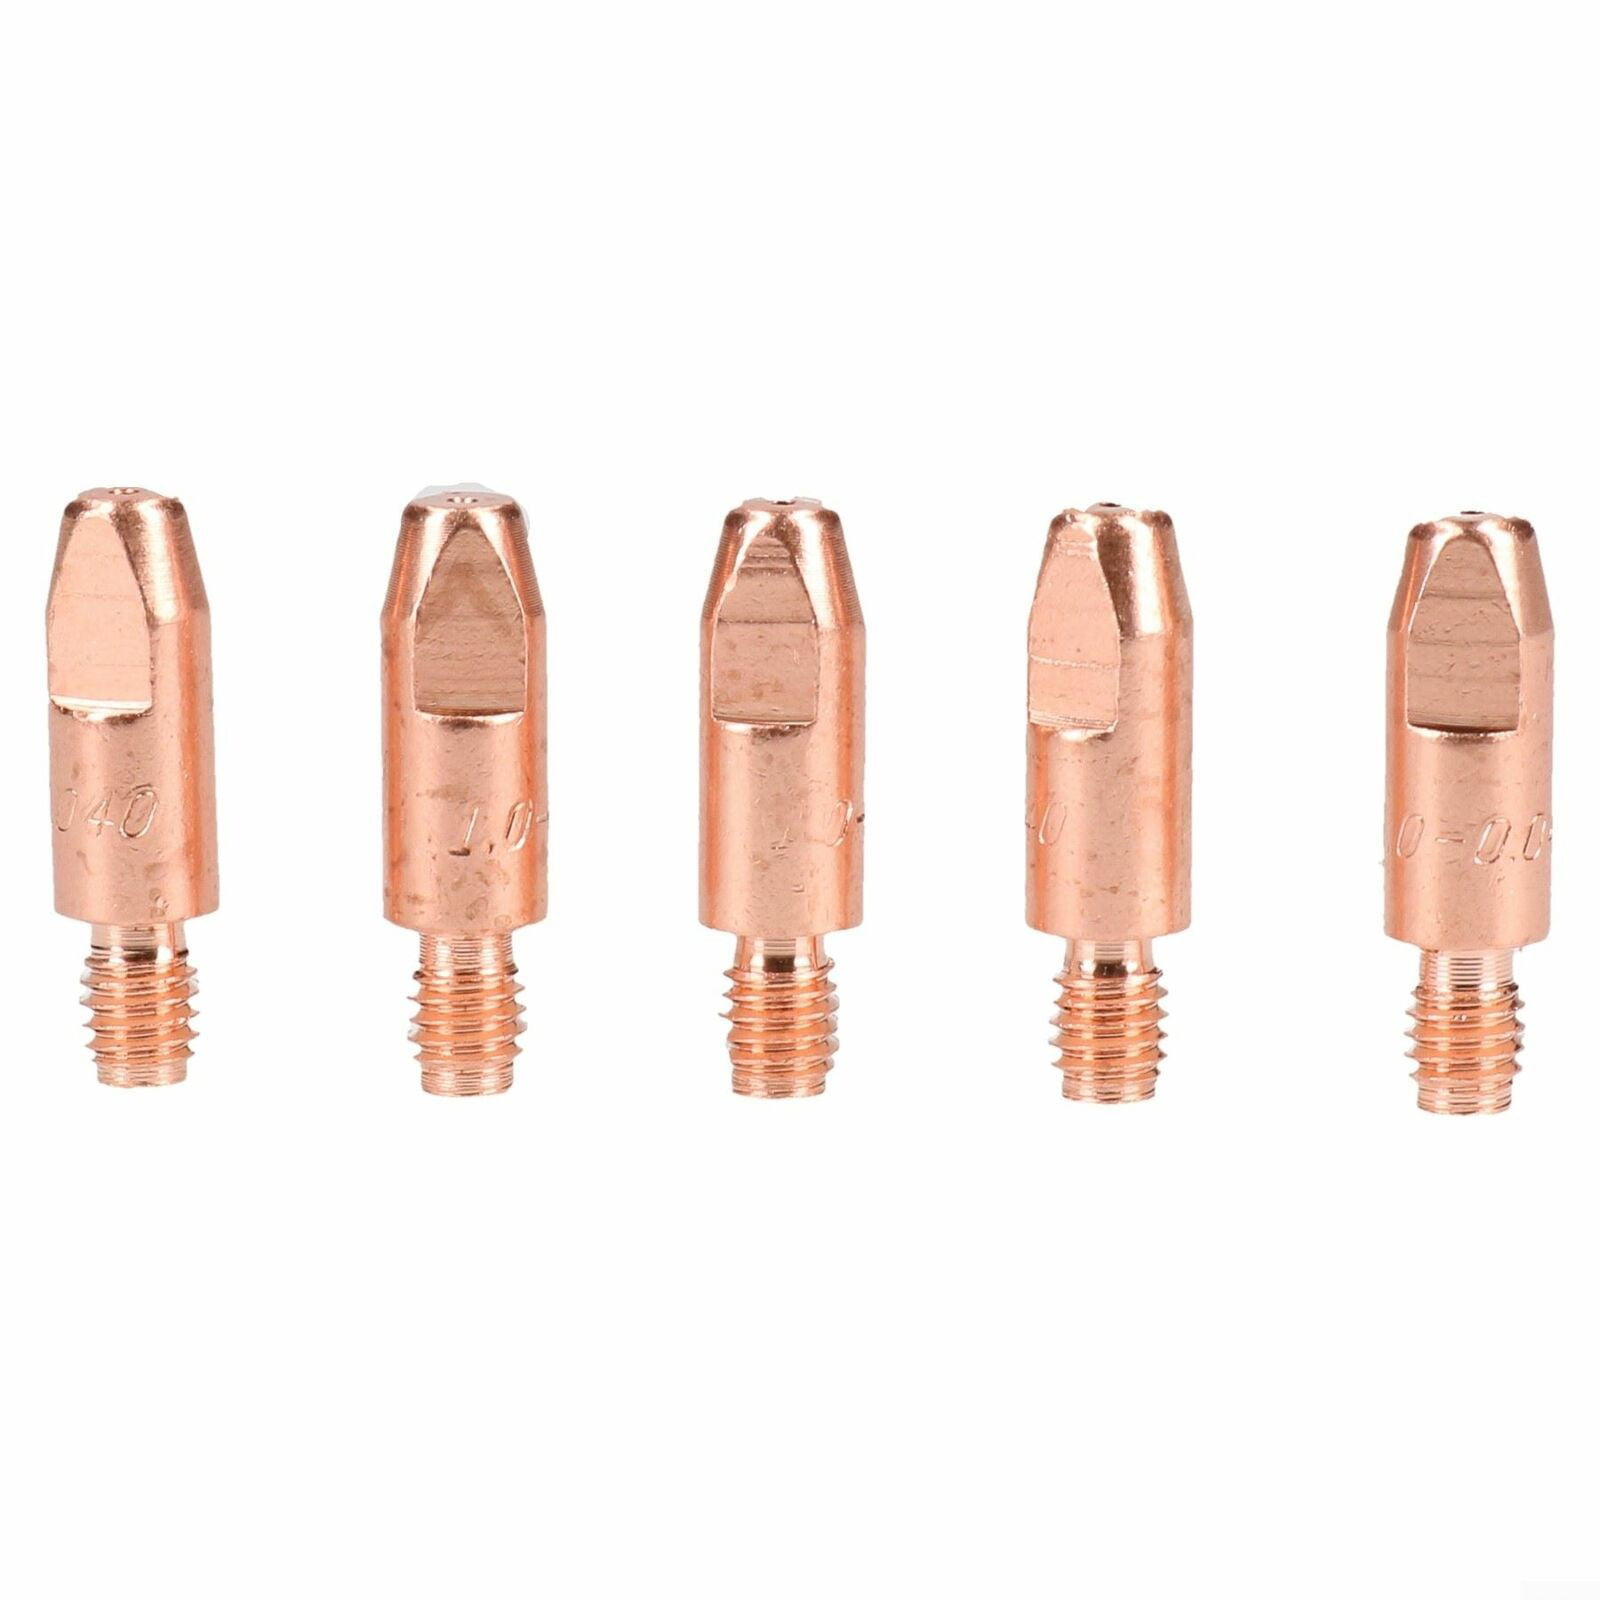 0.8mm Mig Welding Welder Round Contact Tips for MB25 MB36 Euro Torches 25pk 